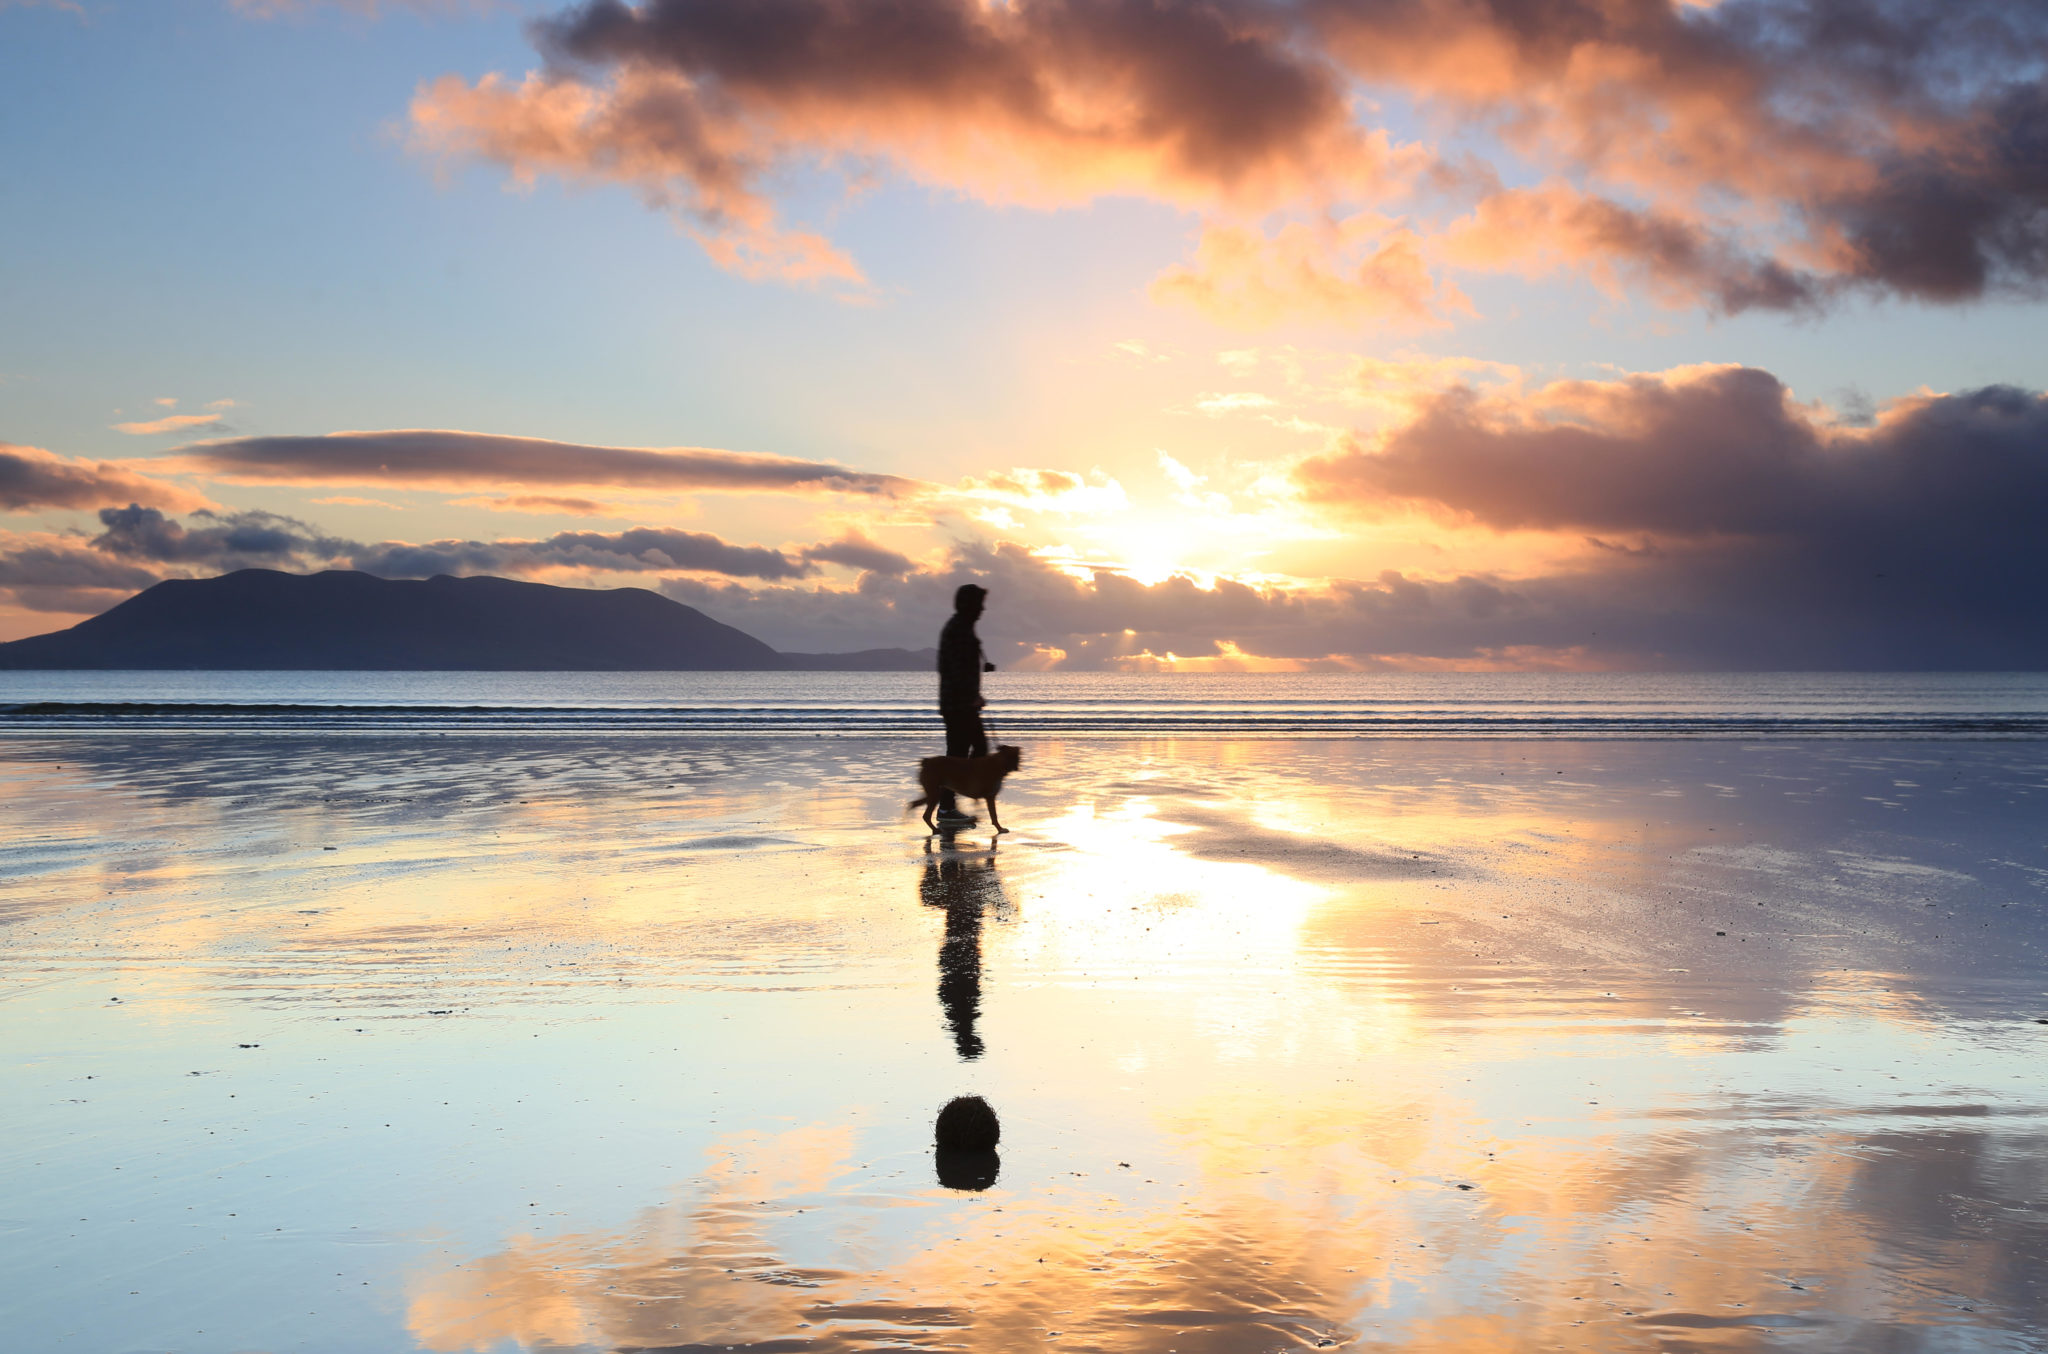 Scenic view over water in Ireland with man and dog. ImagE: Image: Michael Diggin / Alamy Stock Photo